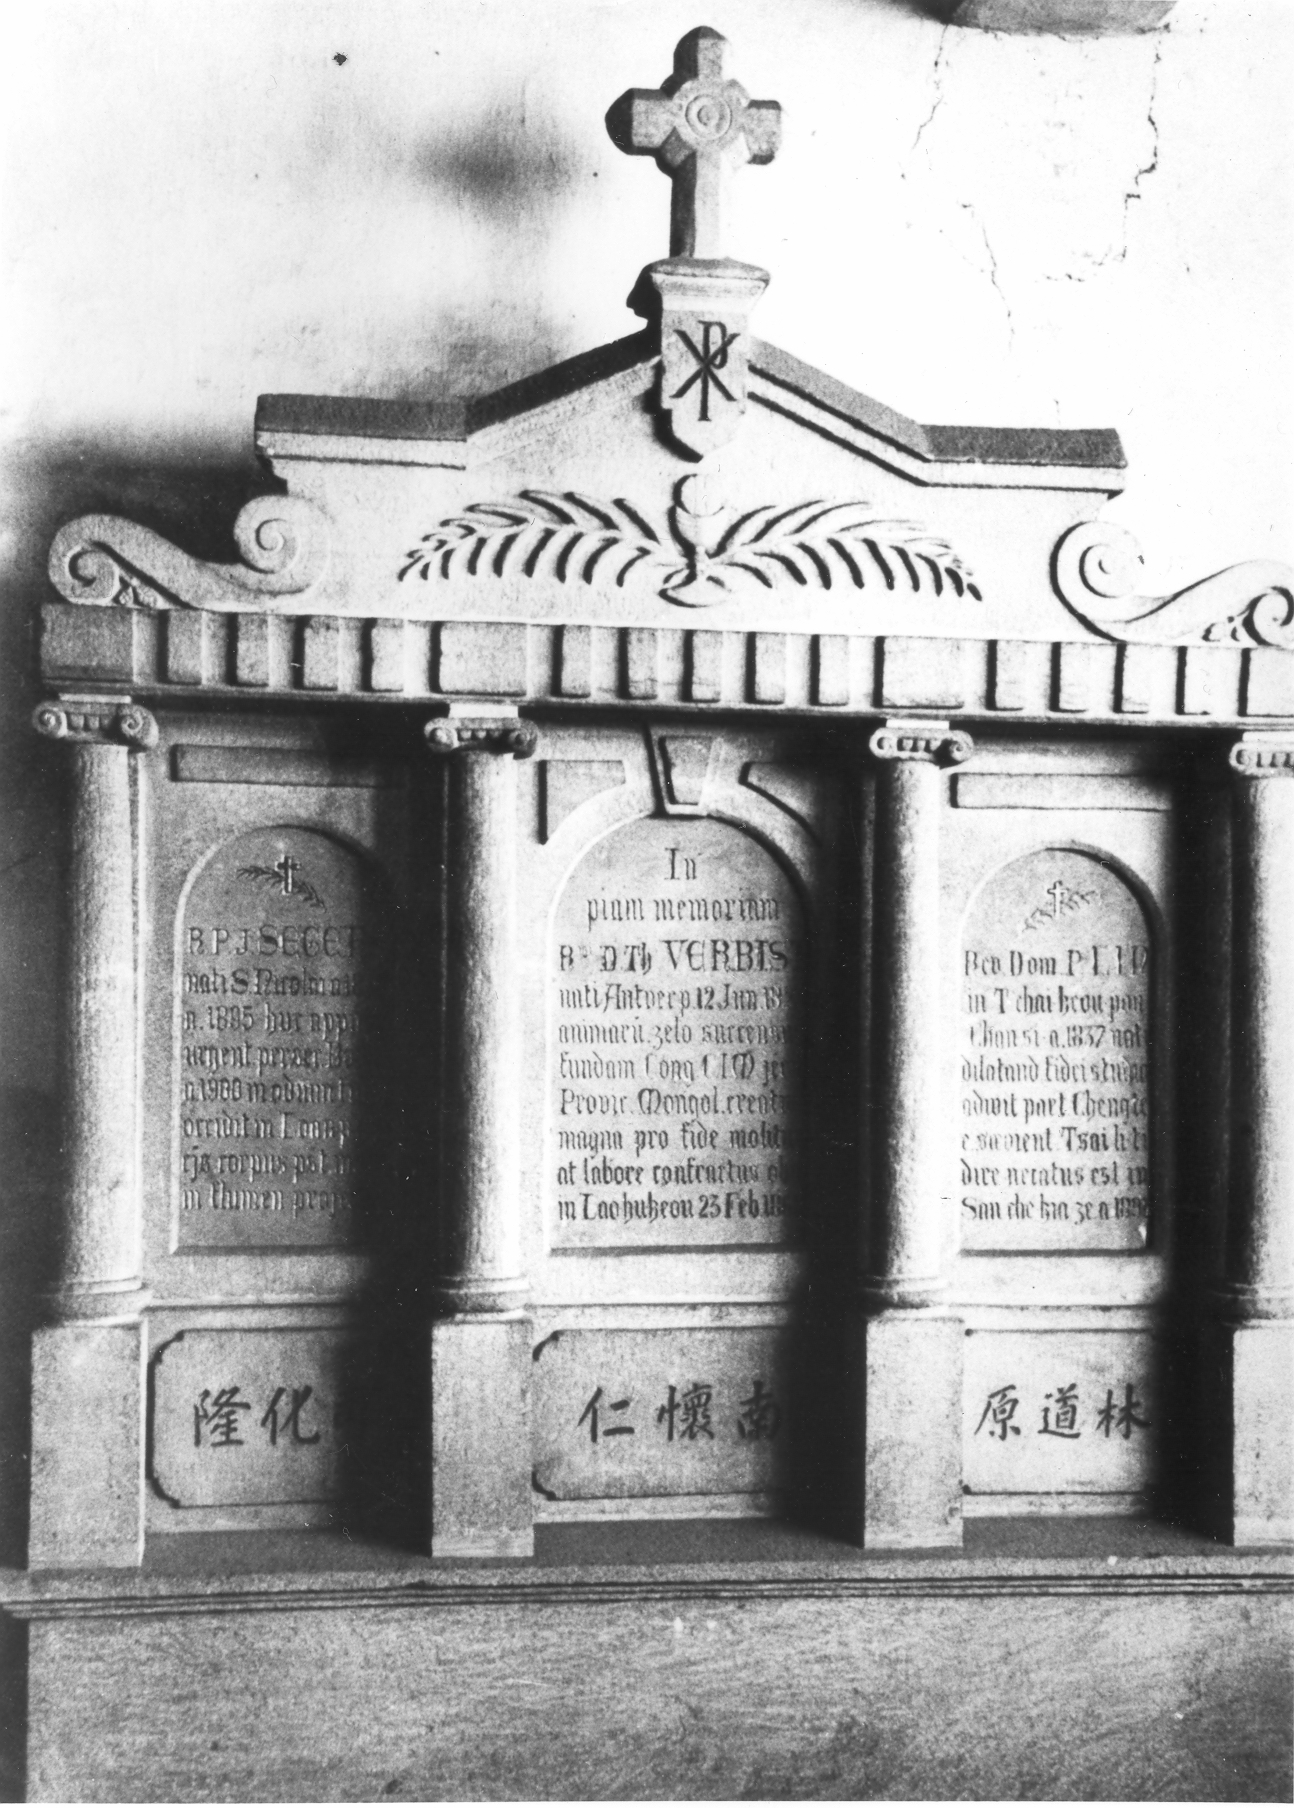  “The tomb of father Verbist inside the old Church of Laohugou”